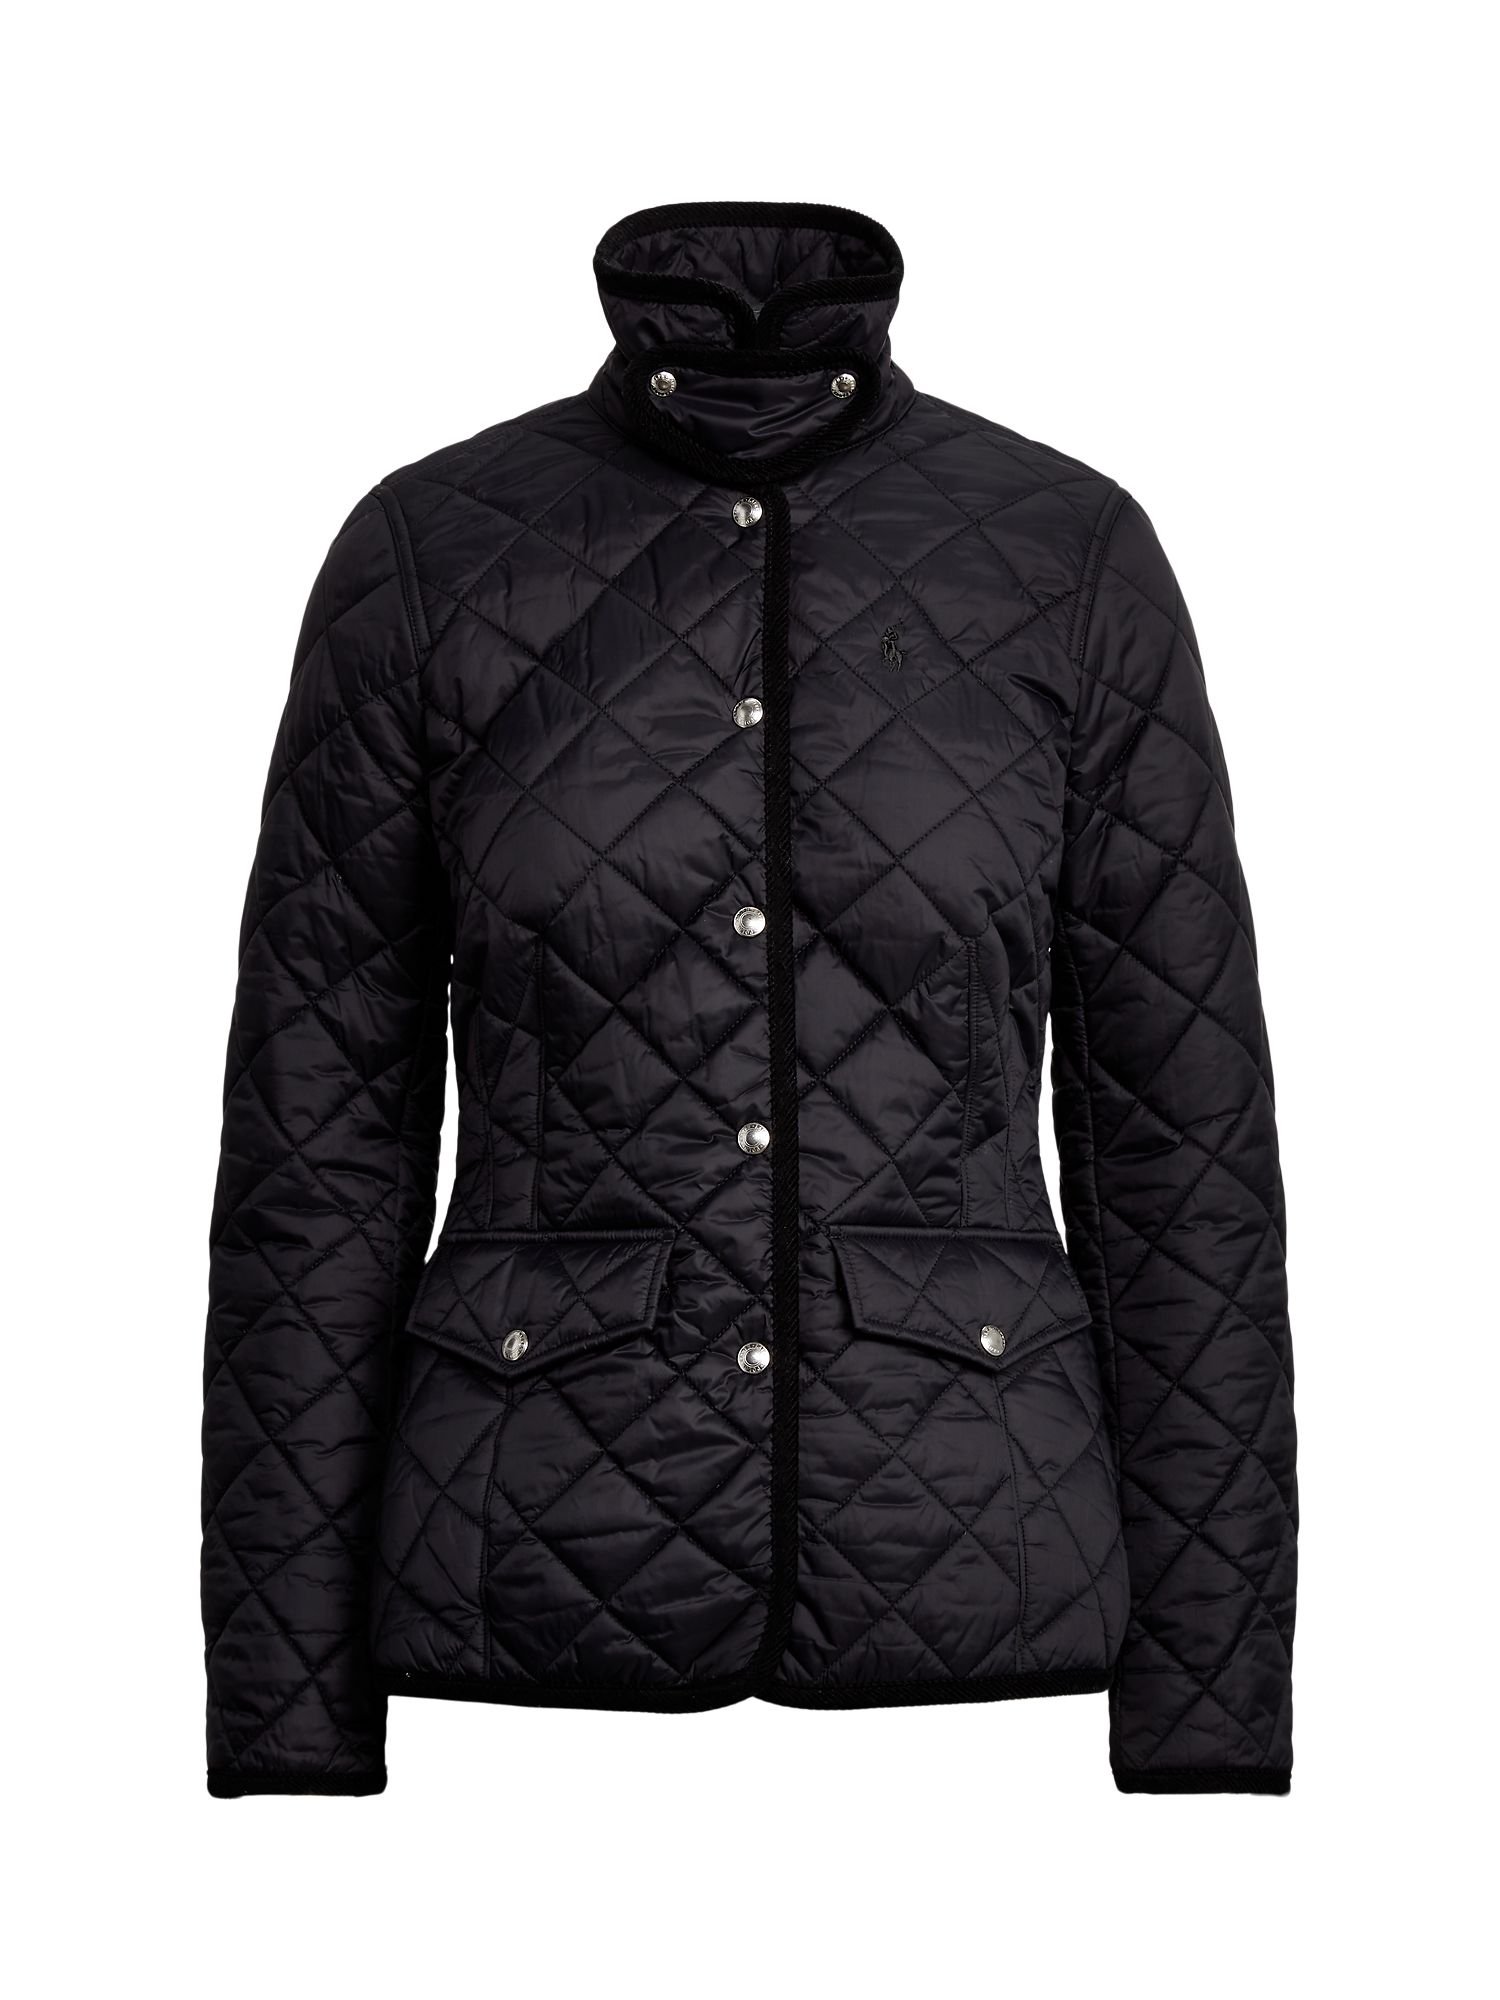 Polo Ralph Lauren Harper Quilted Jacket, Polo Black at John Lewis ...